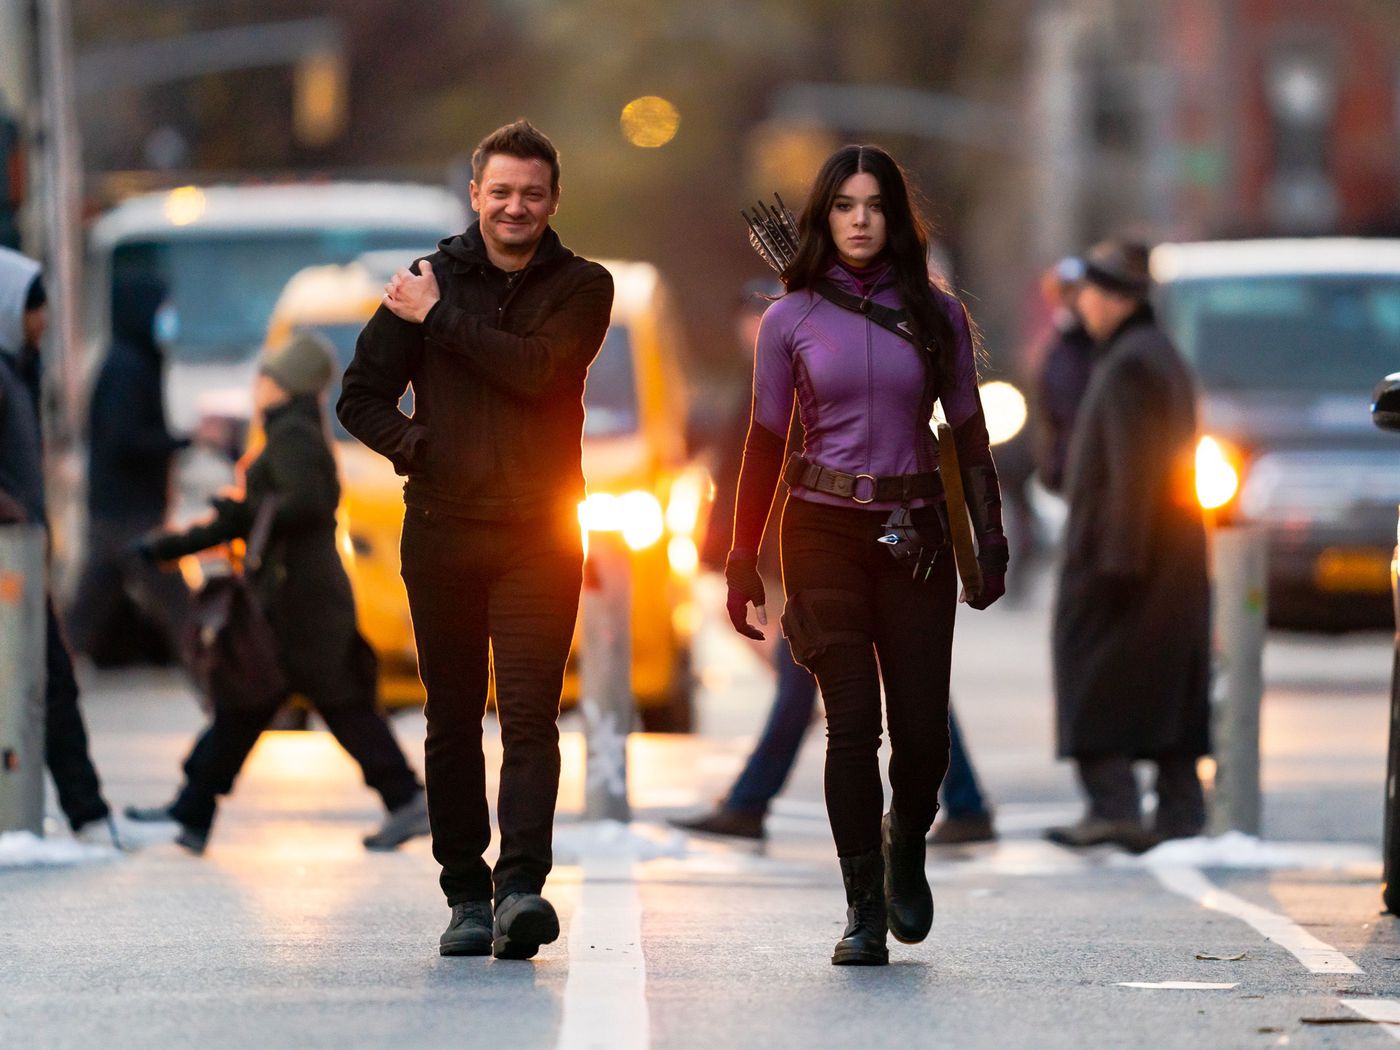 First Hawkeye Set Photos Hailee Steinfeld In Costume And Her Dog